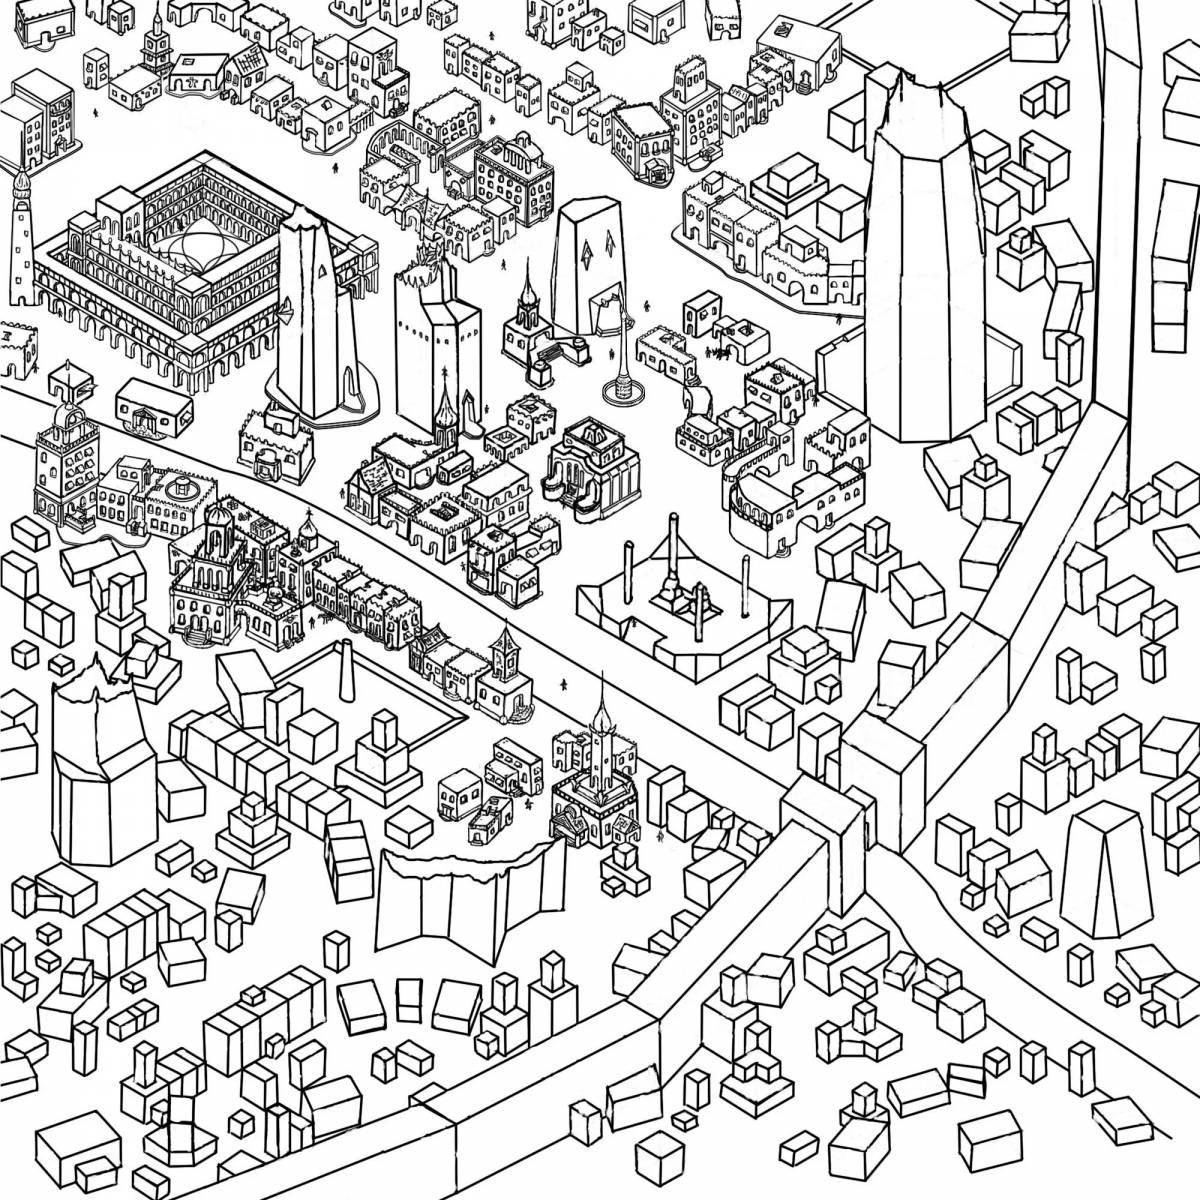 Magic minecraft city coloring page